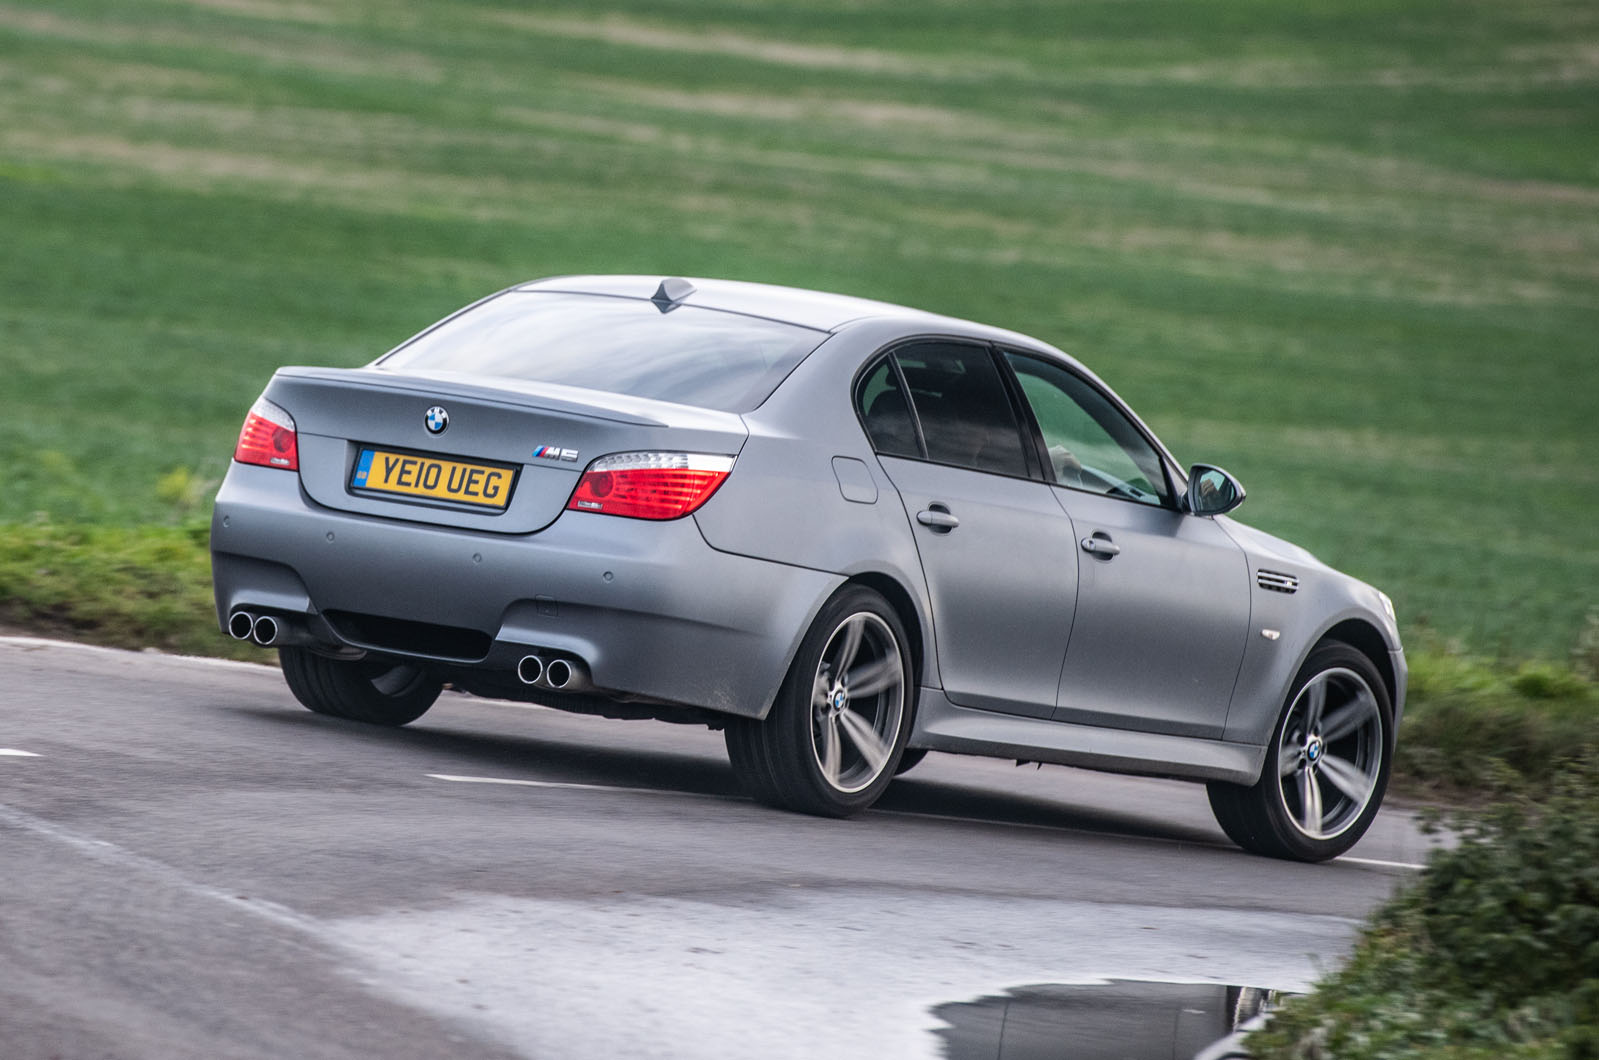 In-Depth Review: BMW M5 E60